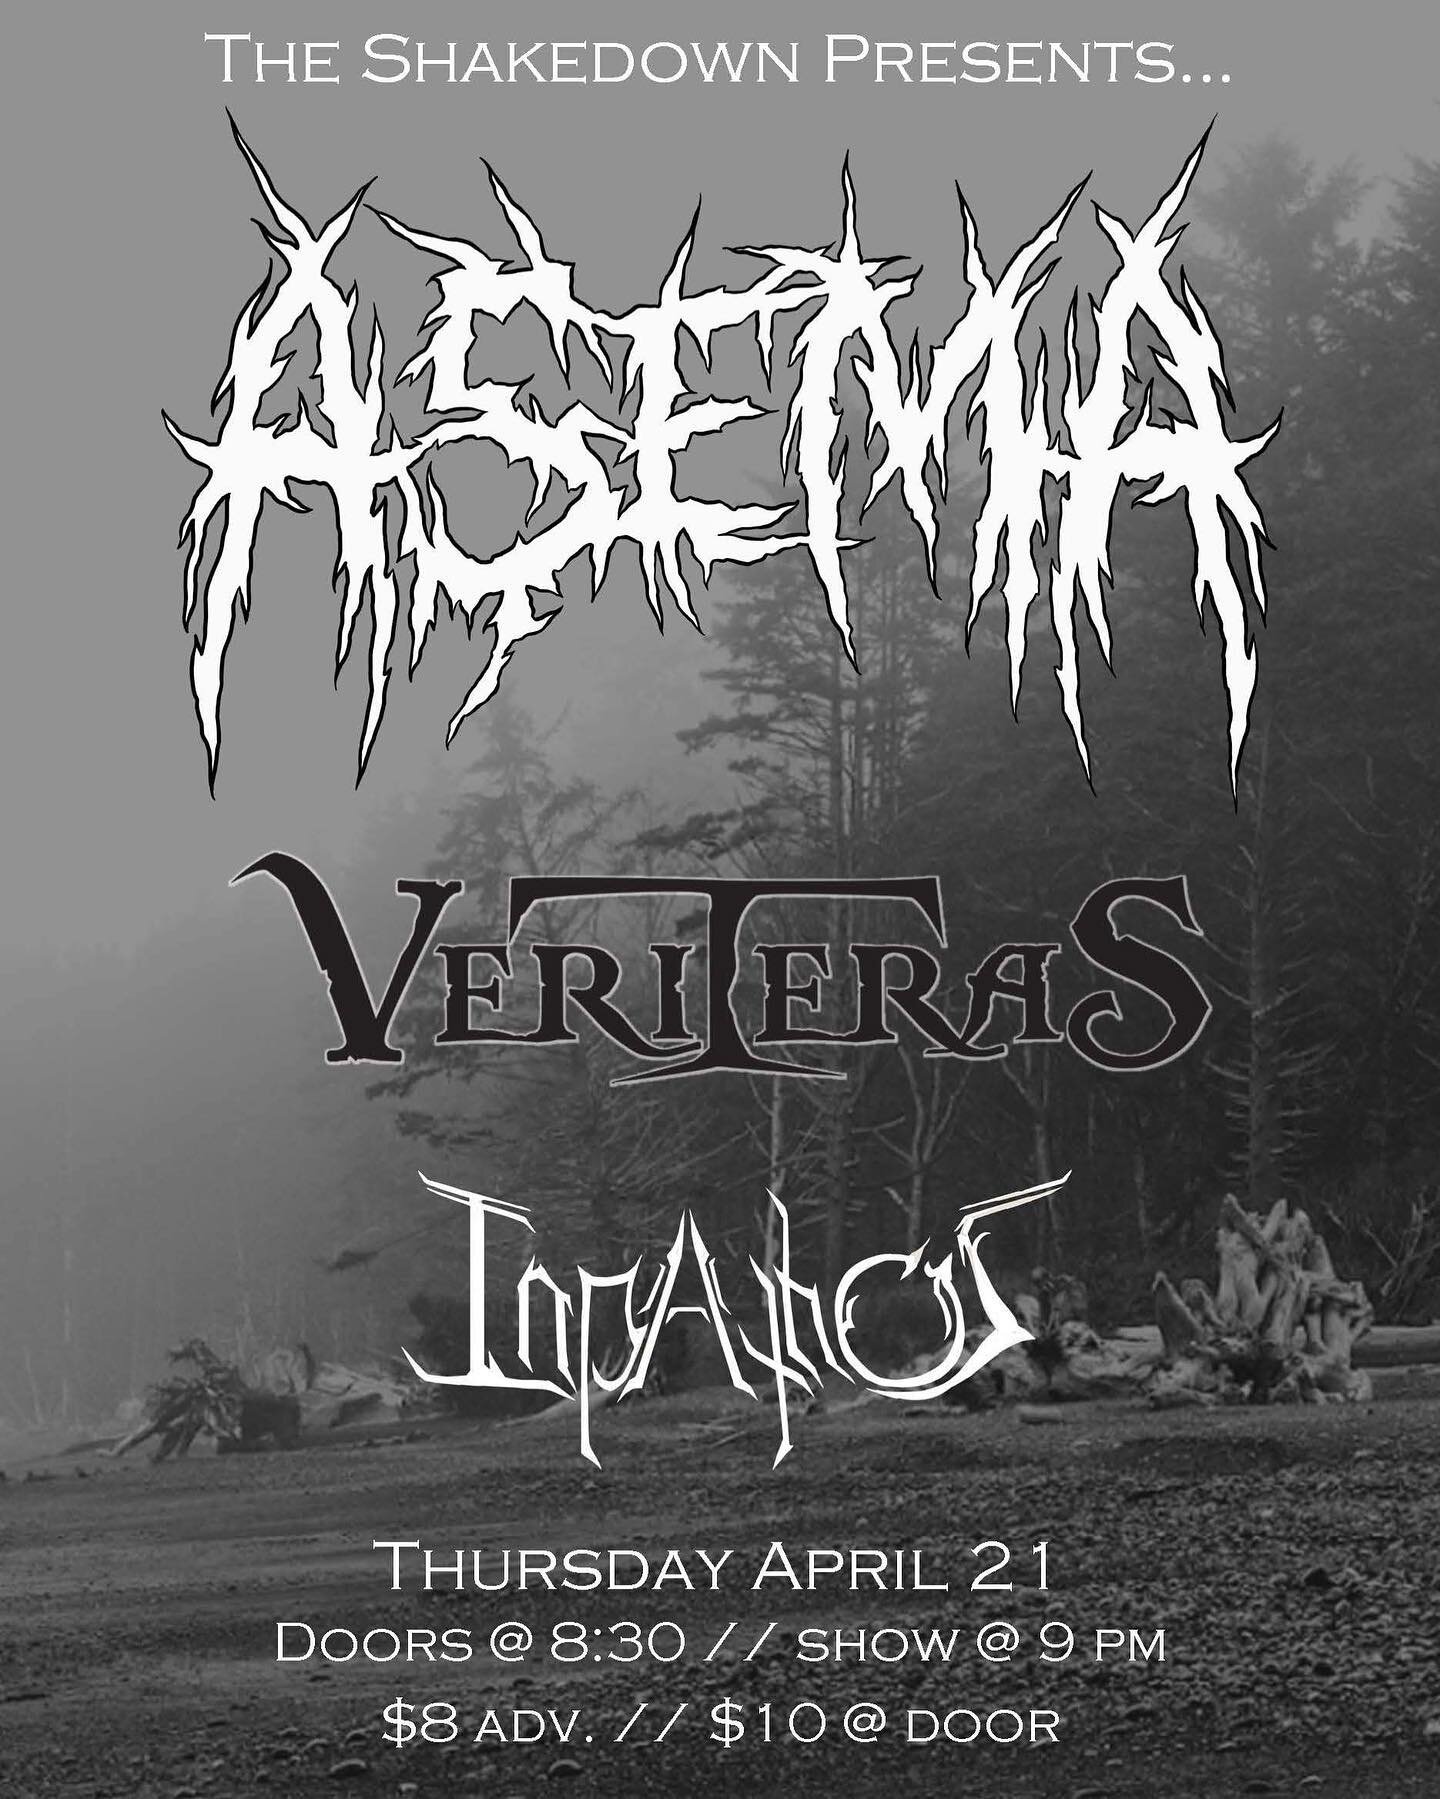 🔥Show Alert🔥

Just your friendly reminder to come on out to @shakedownbham THIS THURSDAY - 4/21/22 for some good ol&rsquo; fashion, face-melting riffage! 

We&rsquo;ll be sharing the stage with melodeath masters @veriteras and deathcore deities @as